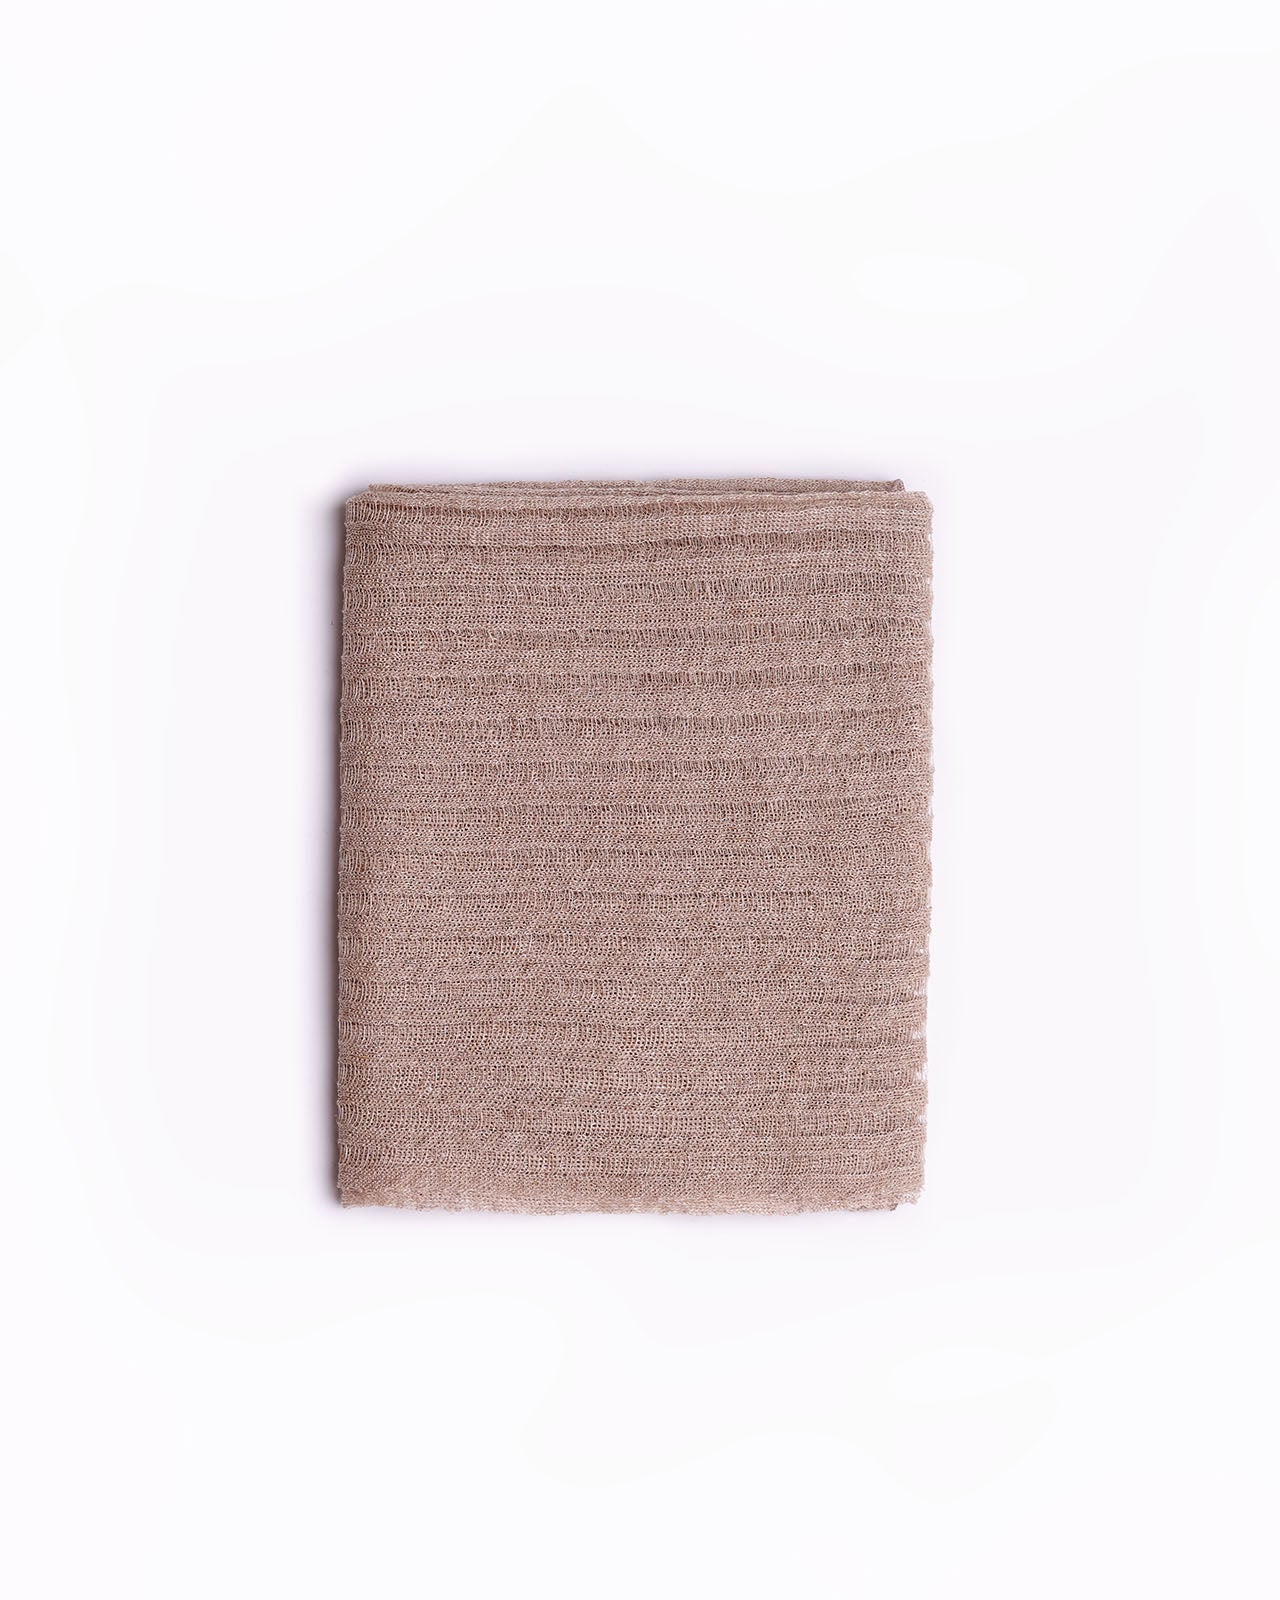 High-quality image of a neatly folded natural linen scarf in a neutral beige color, showcasing its textured weave. This elegant scarf is perfect for adding a touch of sophistication to any wardrobe, ideal for both casual and formal occasions. Its simple yet stylish design and versatile color make it an essential accessory for fashion-forward individuals.